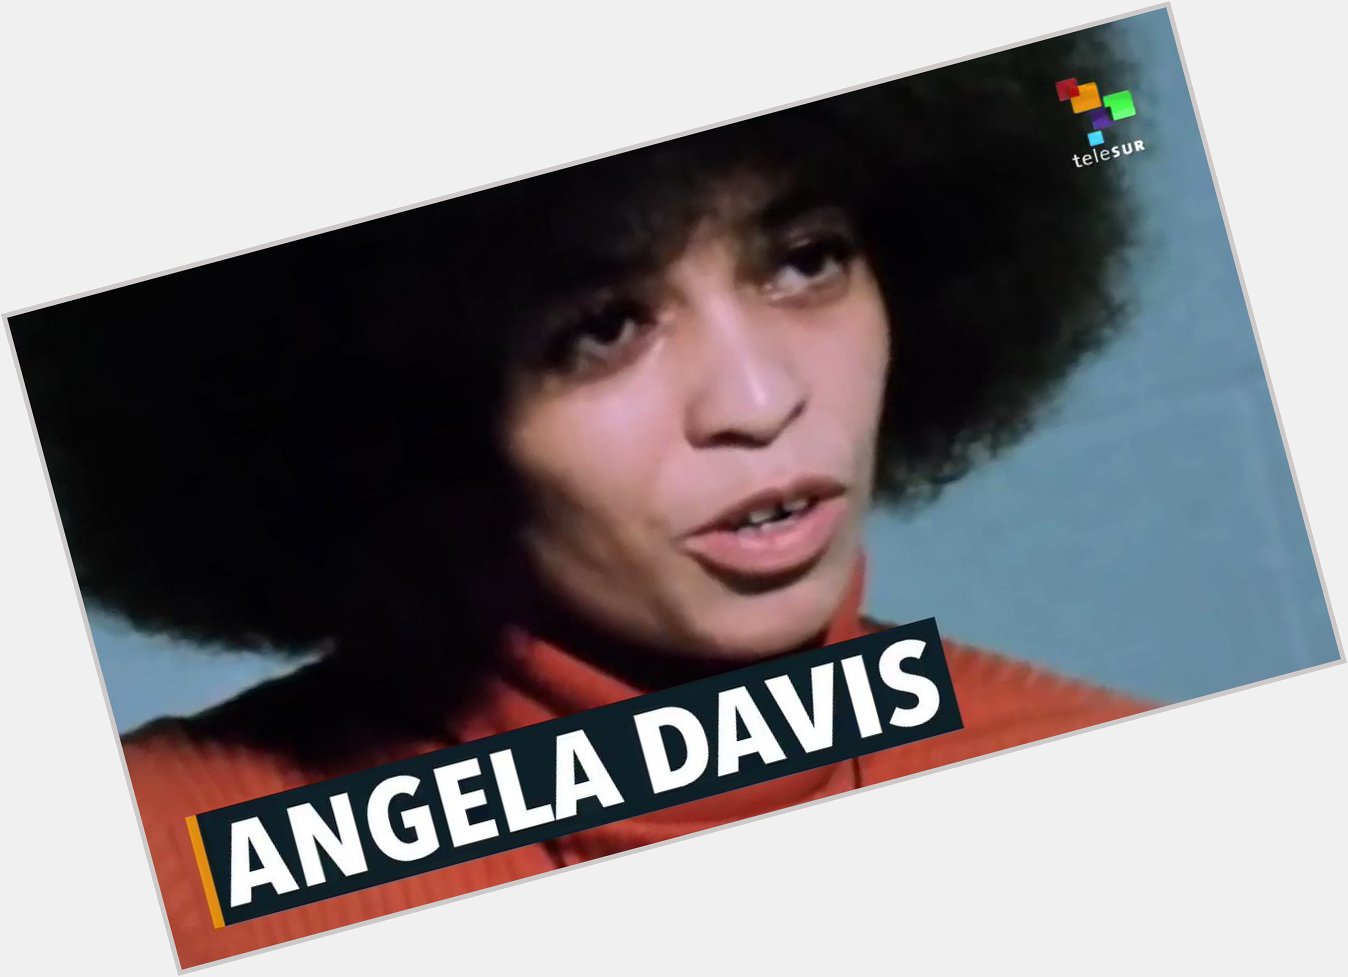 Happy Birthday, Angela Davis! Davis, a living revolutionary, has been fighting for justice for 74 years! 